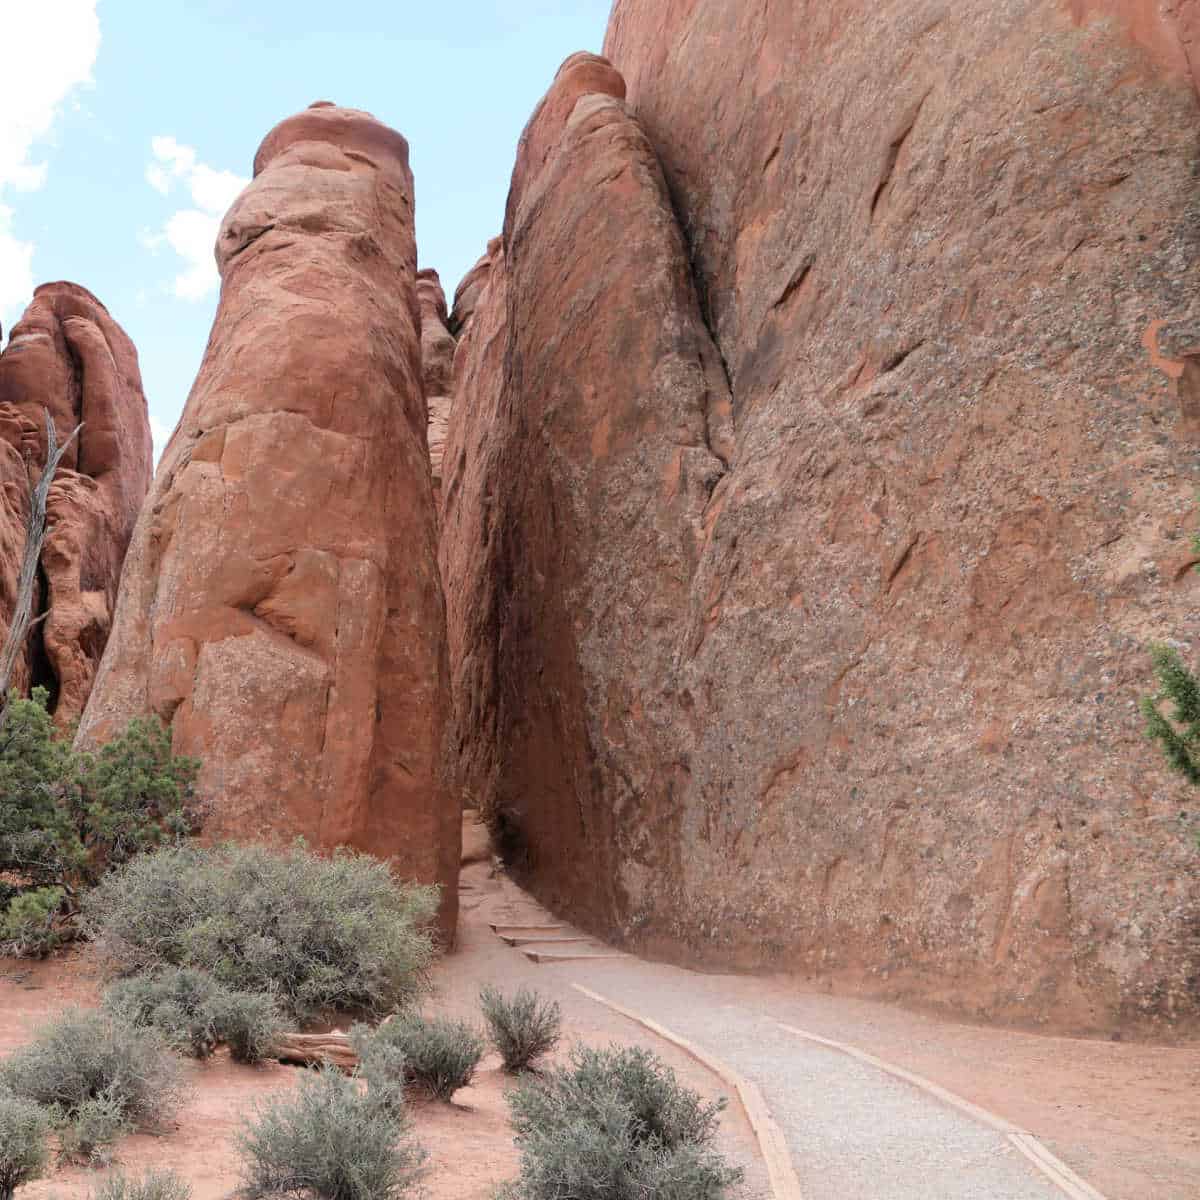 Trail enters between two sandstone fins towards sandstone arch